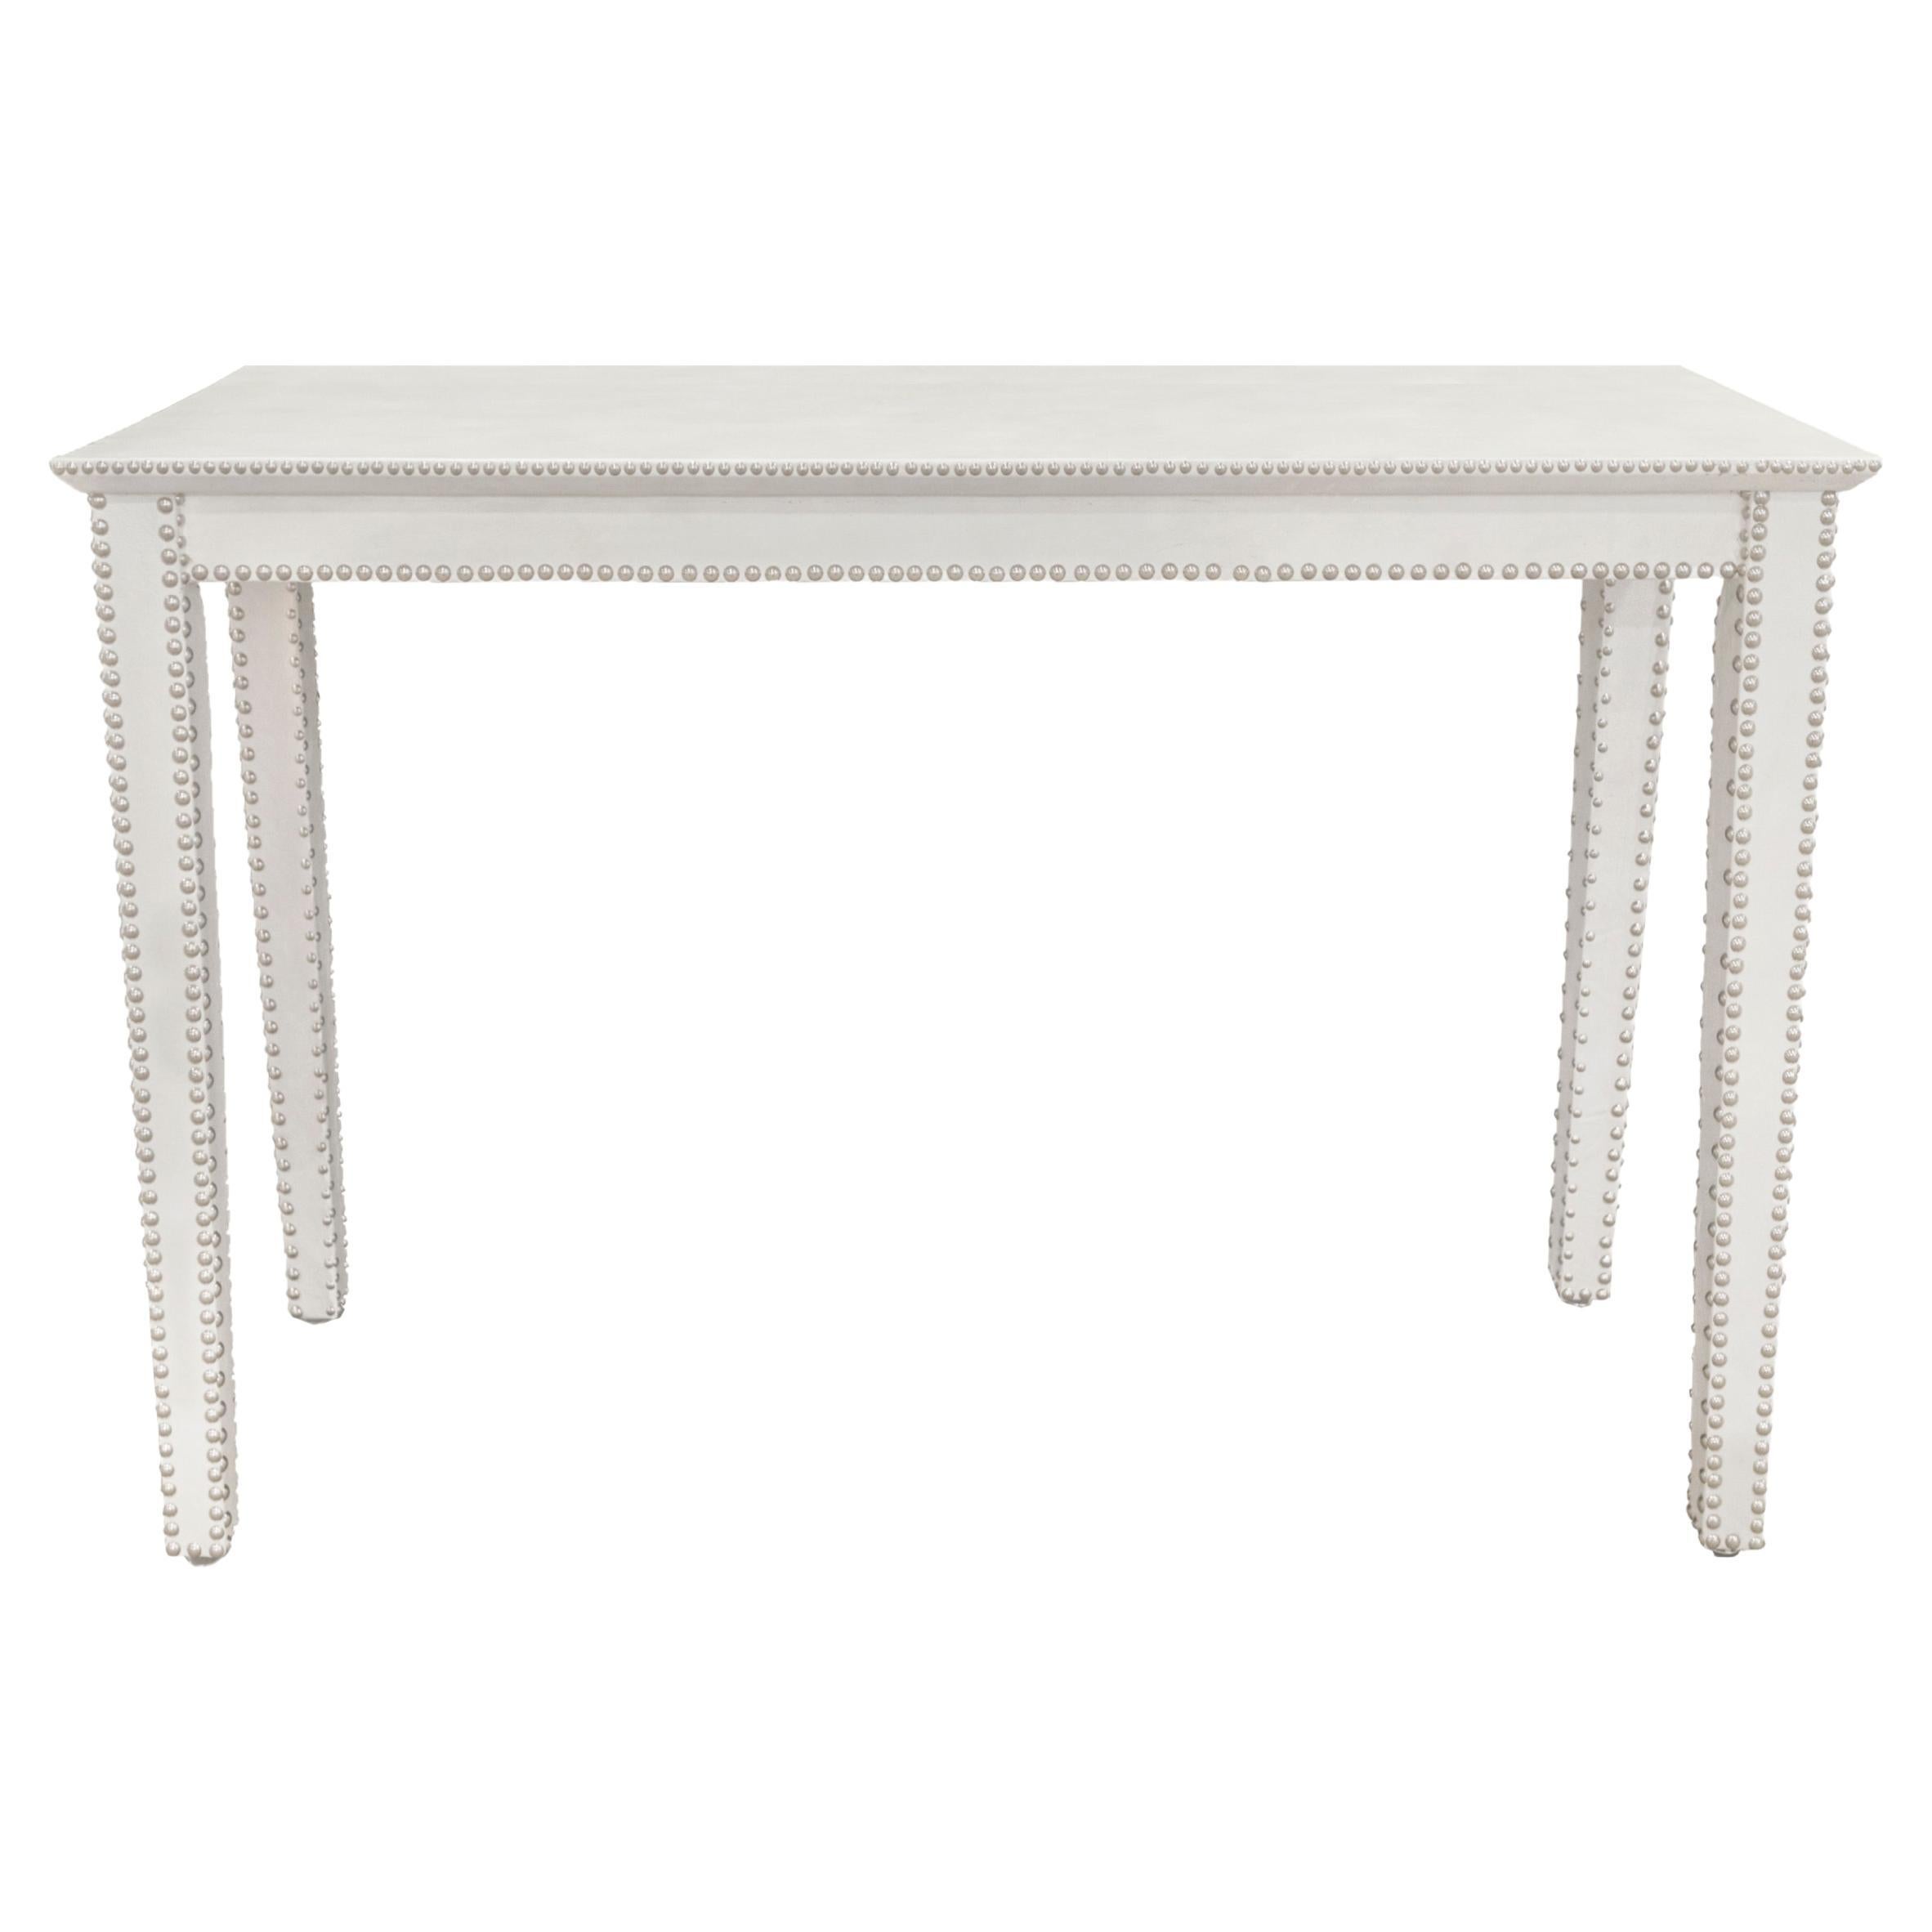 Lobel Originals Console Table in Leather and Chrome Studs circa 2010 'Signed'